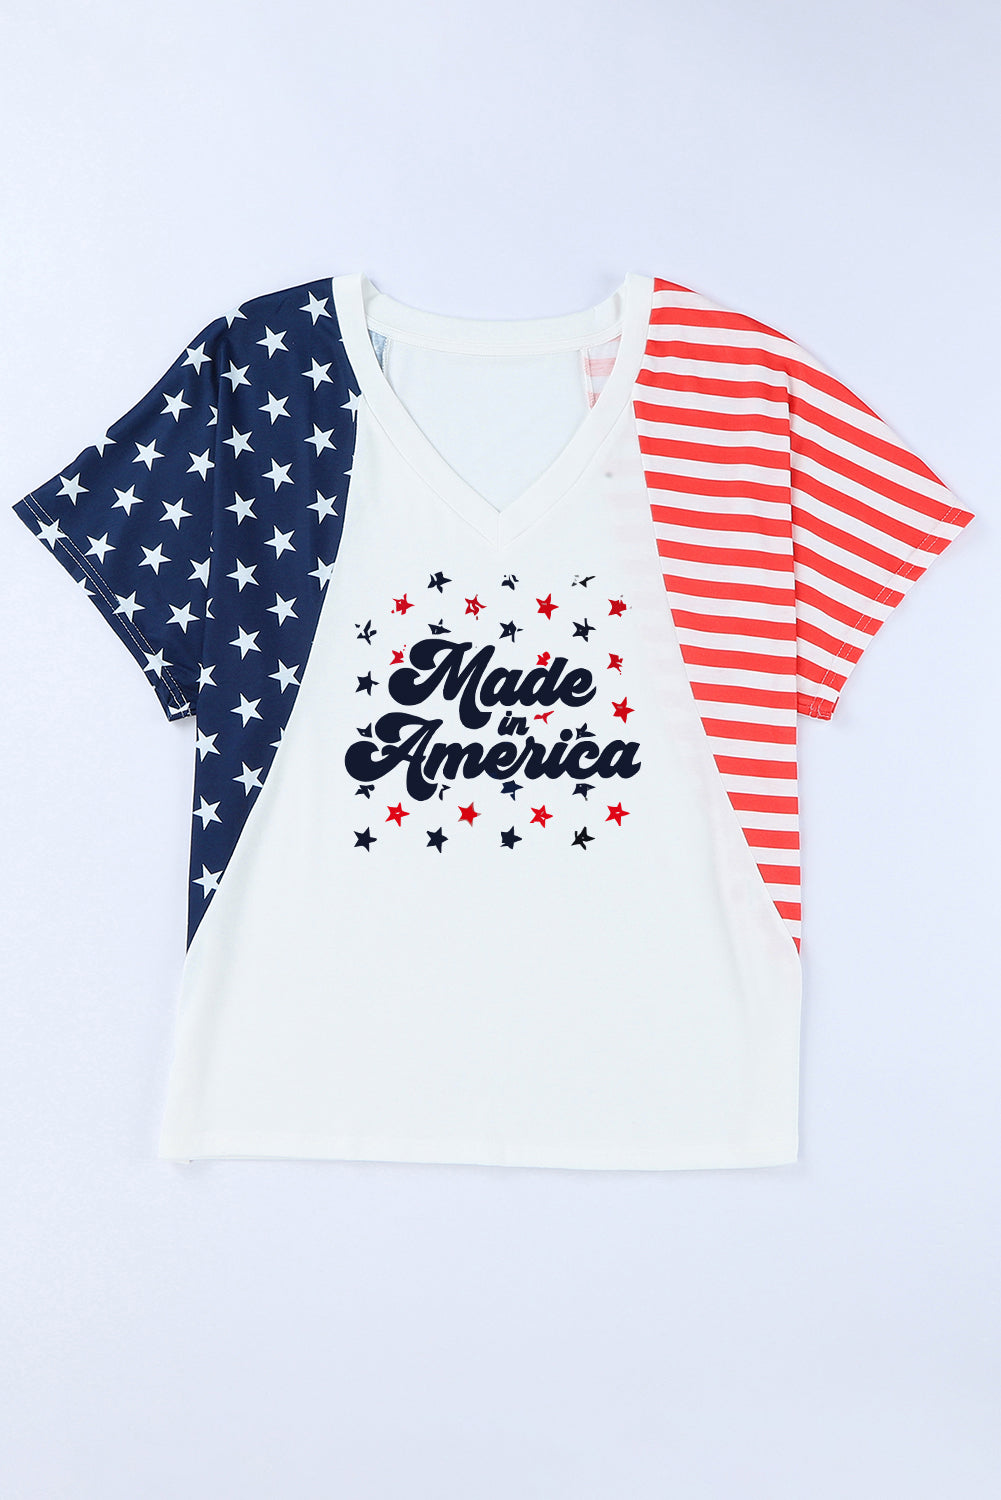 MADE IN AMERICA Stars and Stripes V-Neck Tee Shirt